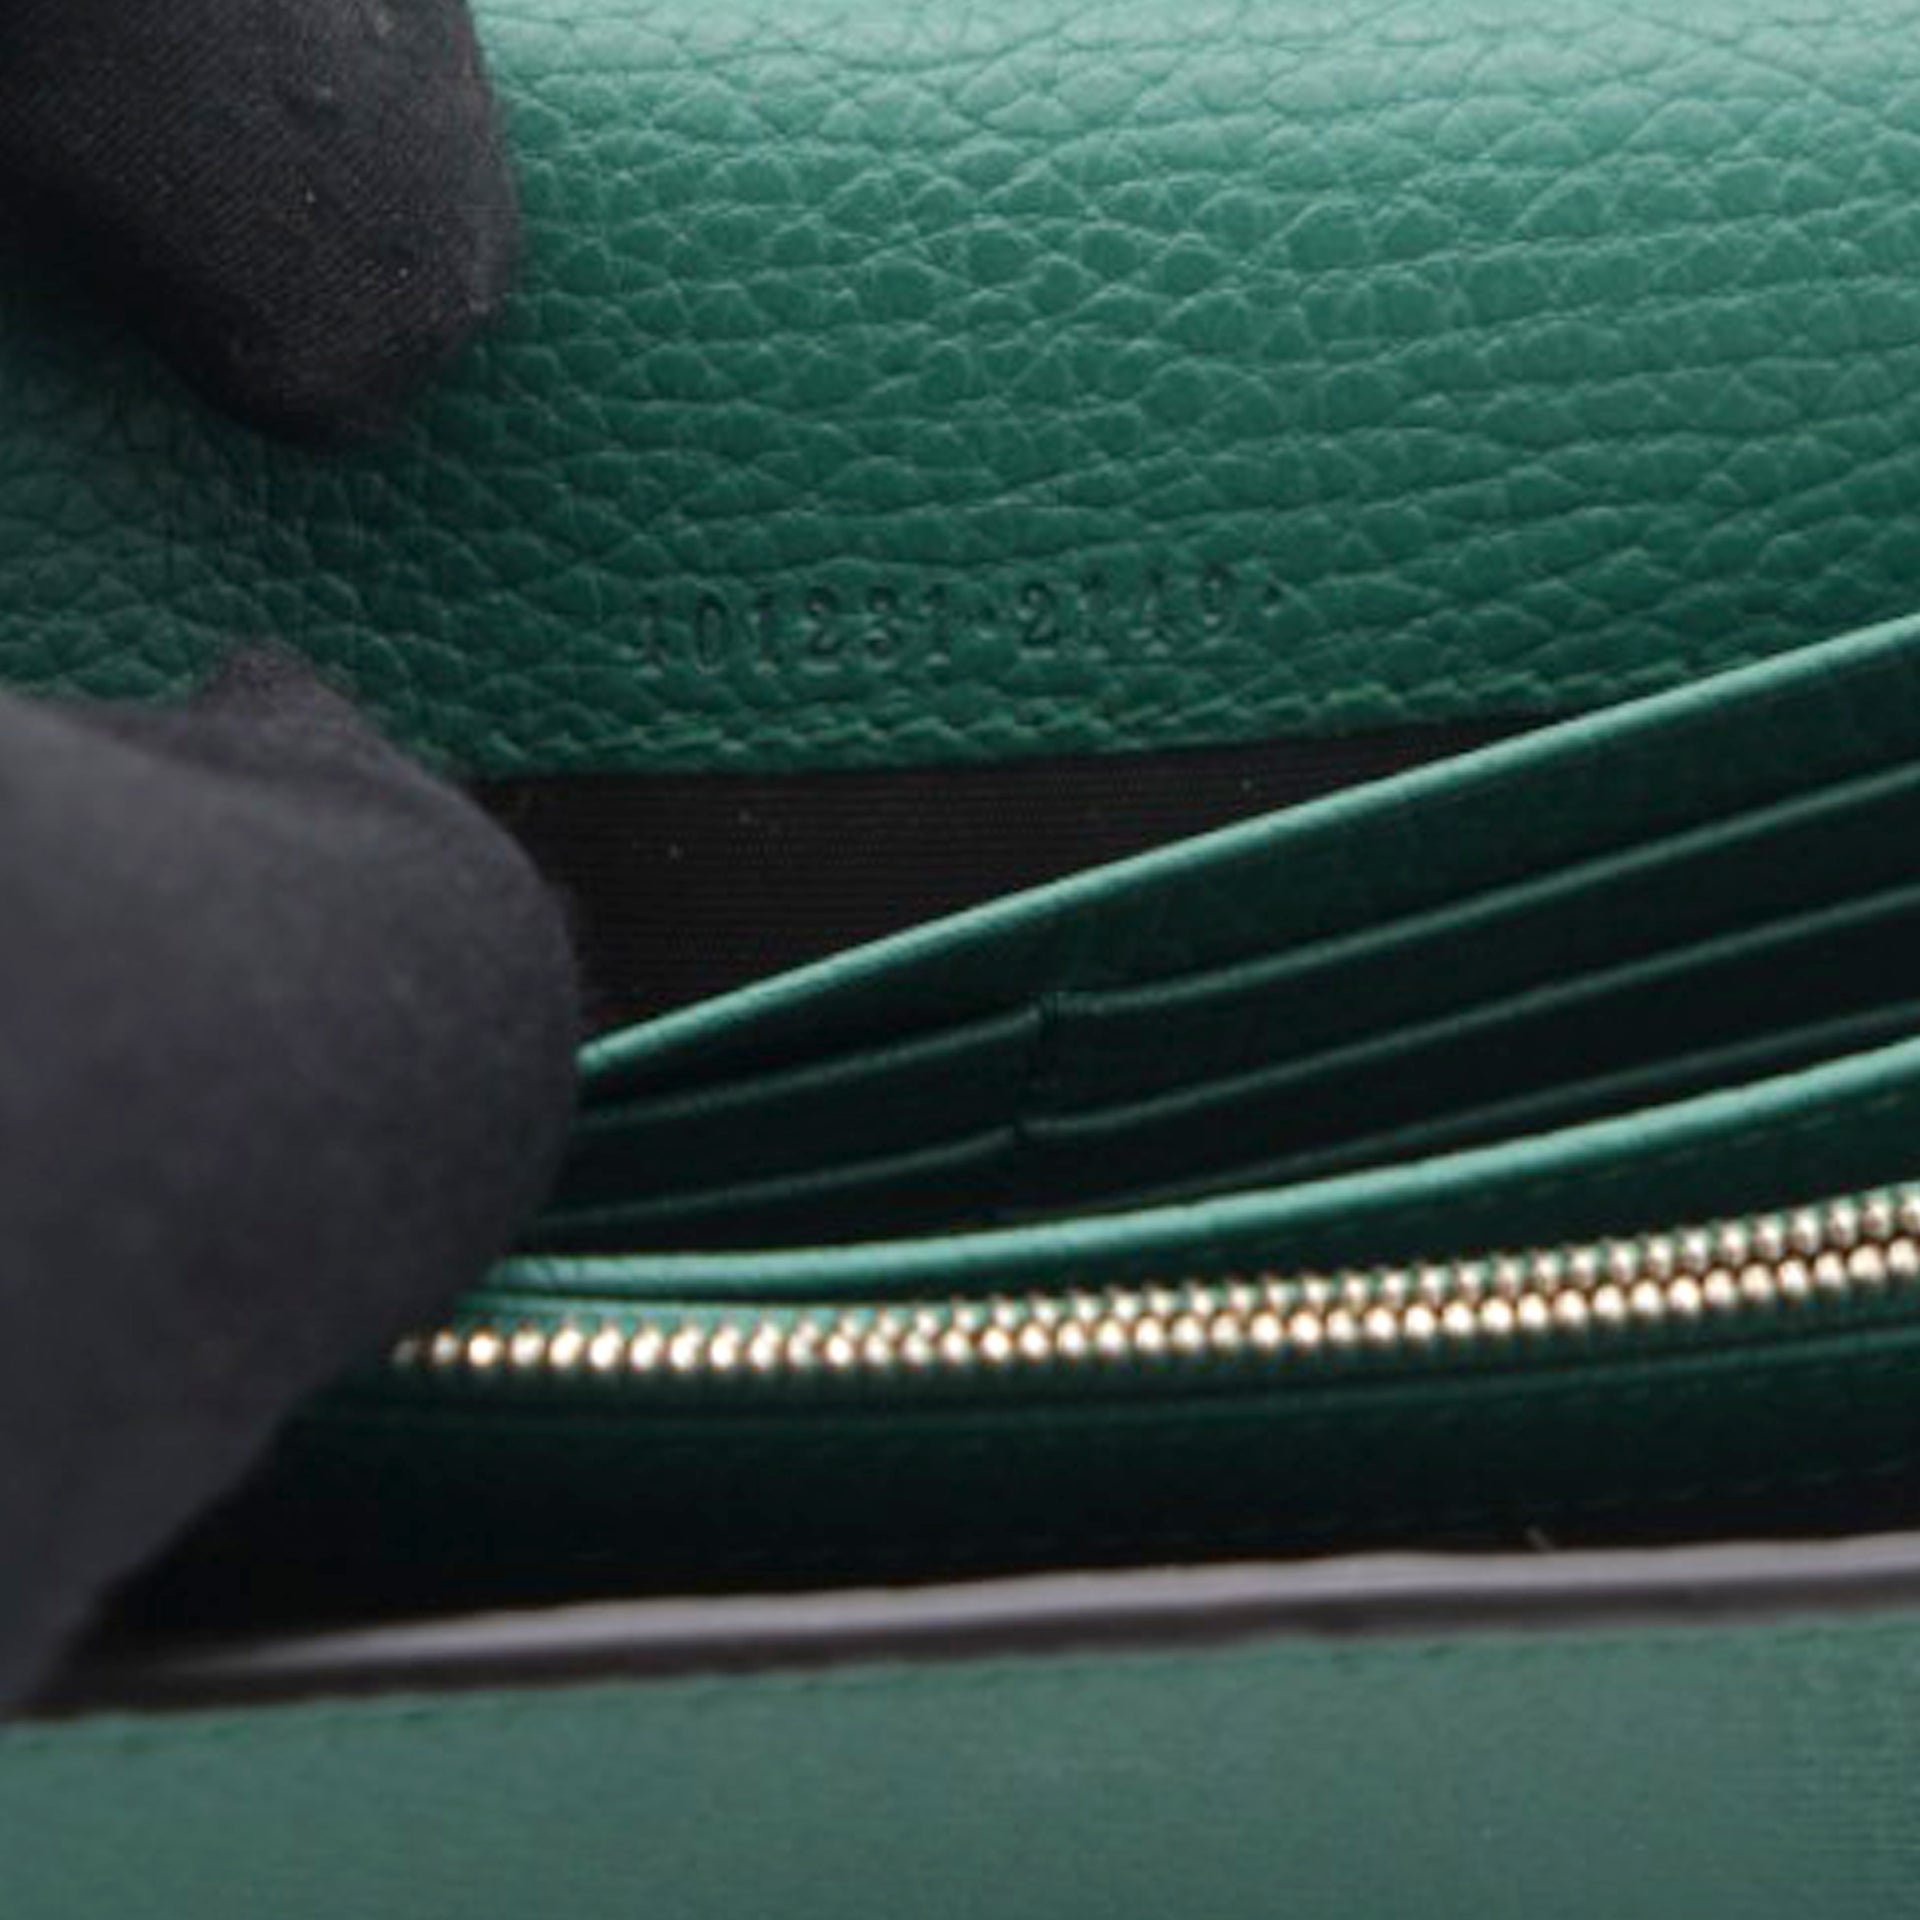 Green Leather Dionysus Wallet On Chain